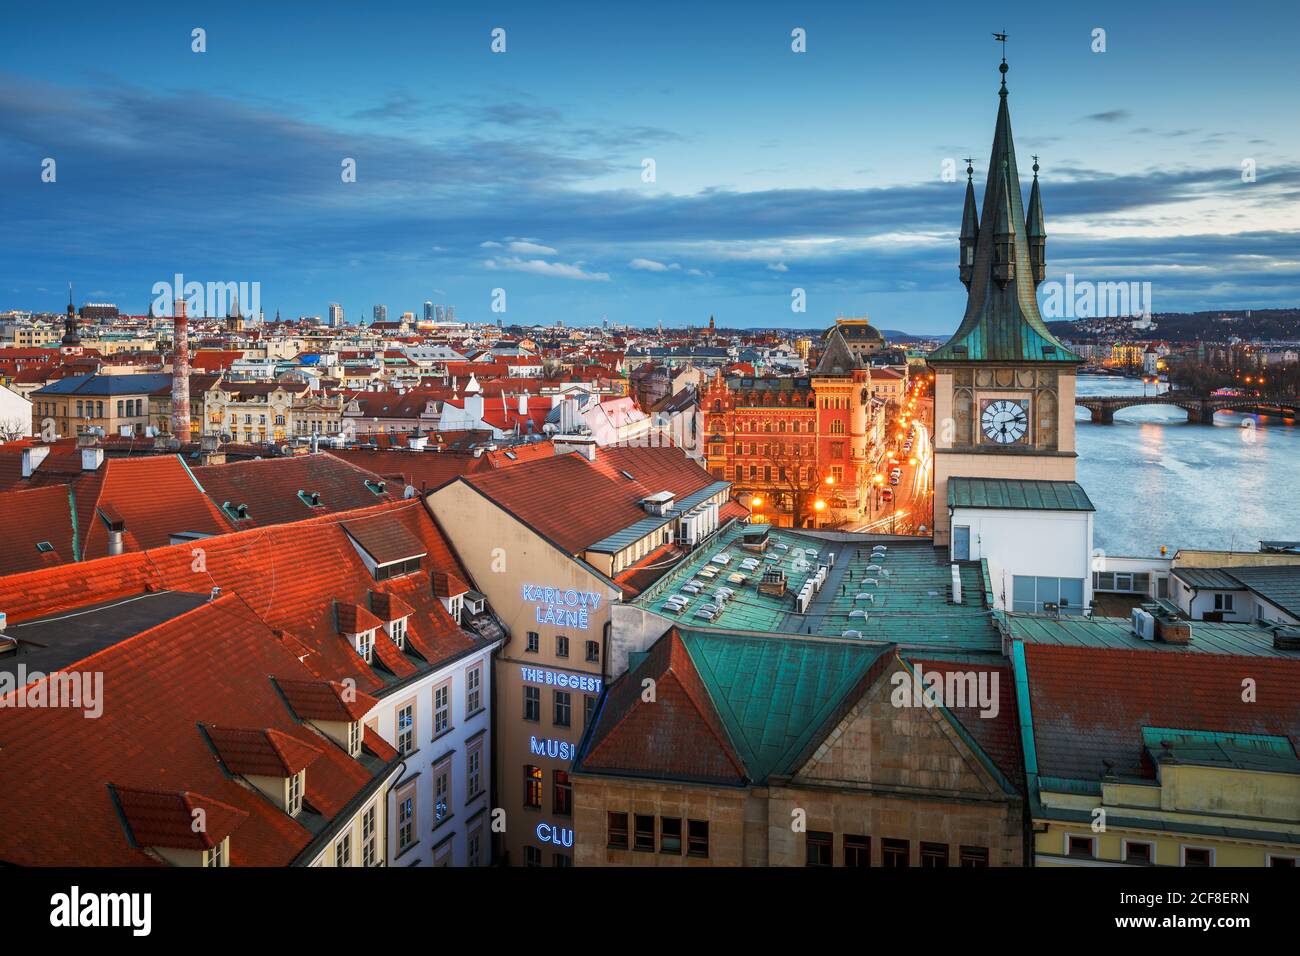 Prague, Czech Republic - March 9, 2019: Evening view of Old Town Water Tower and river Vltava. Stock Photo